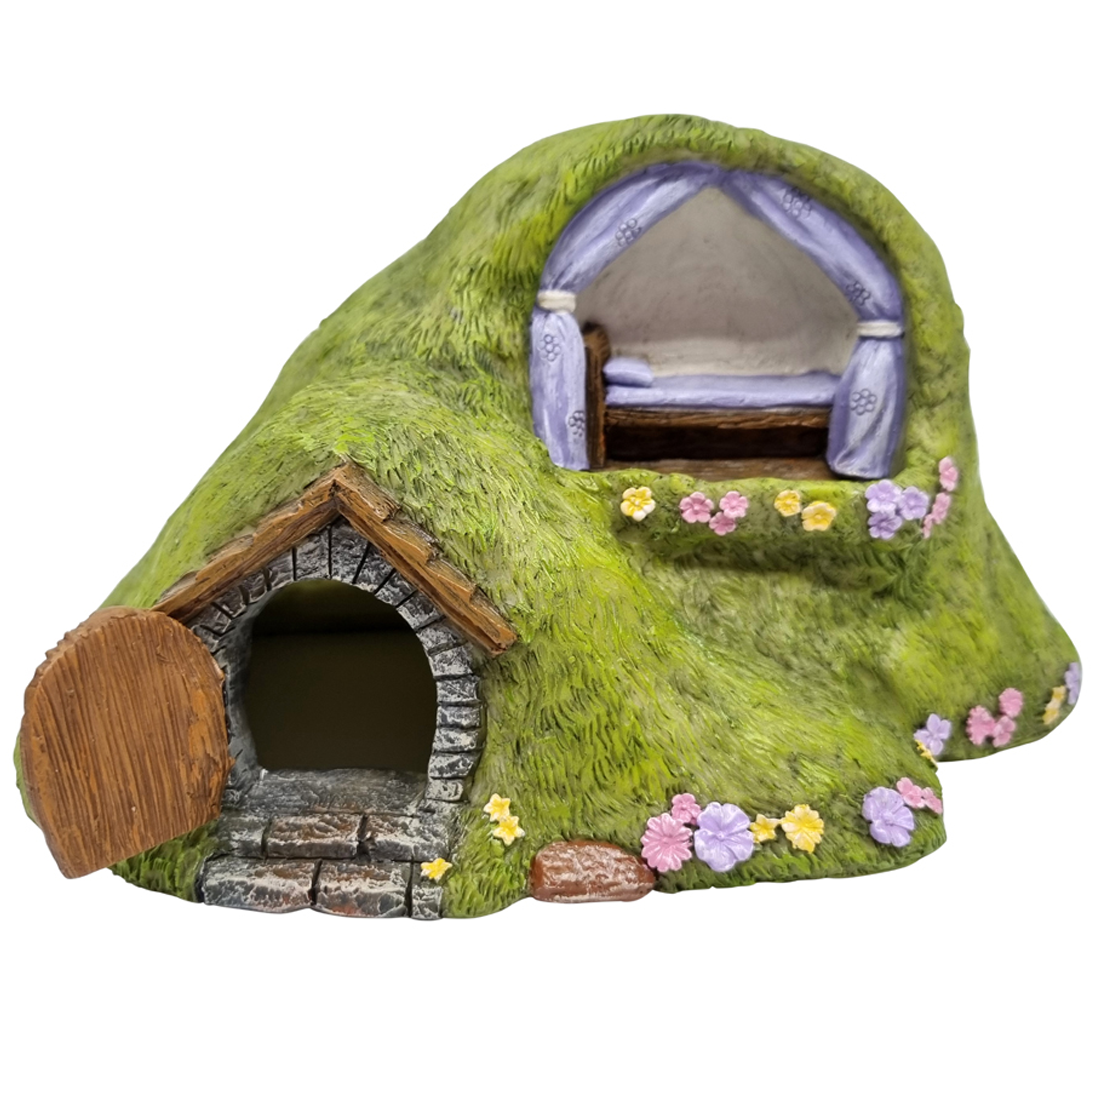 Turf House With A Day Bed Alcove and Opening Door